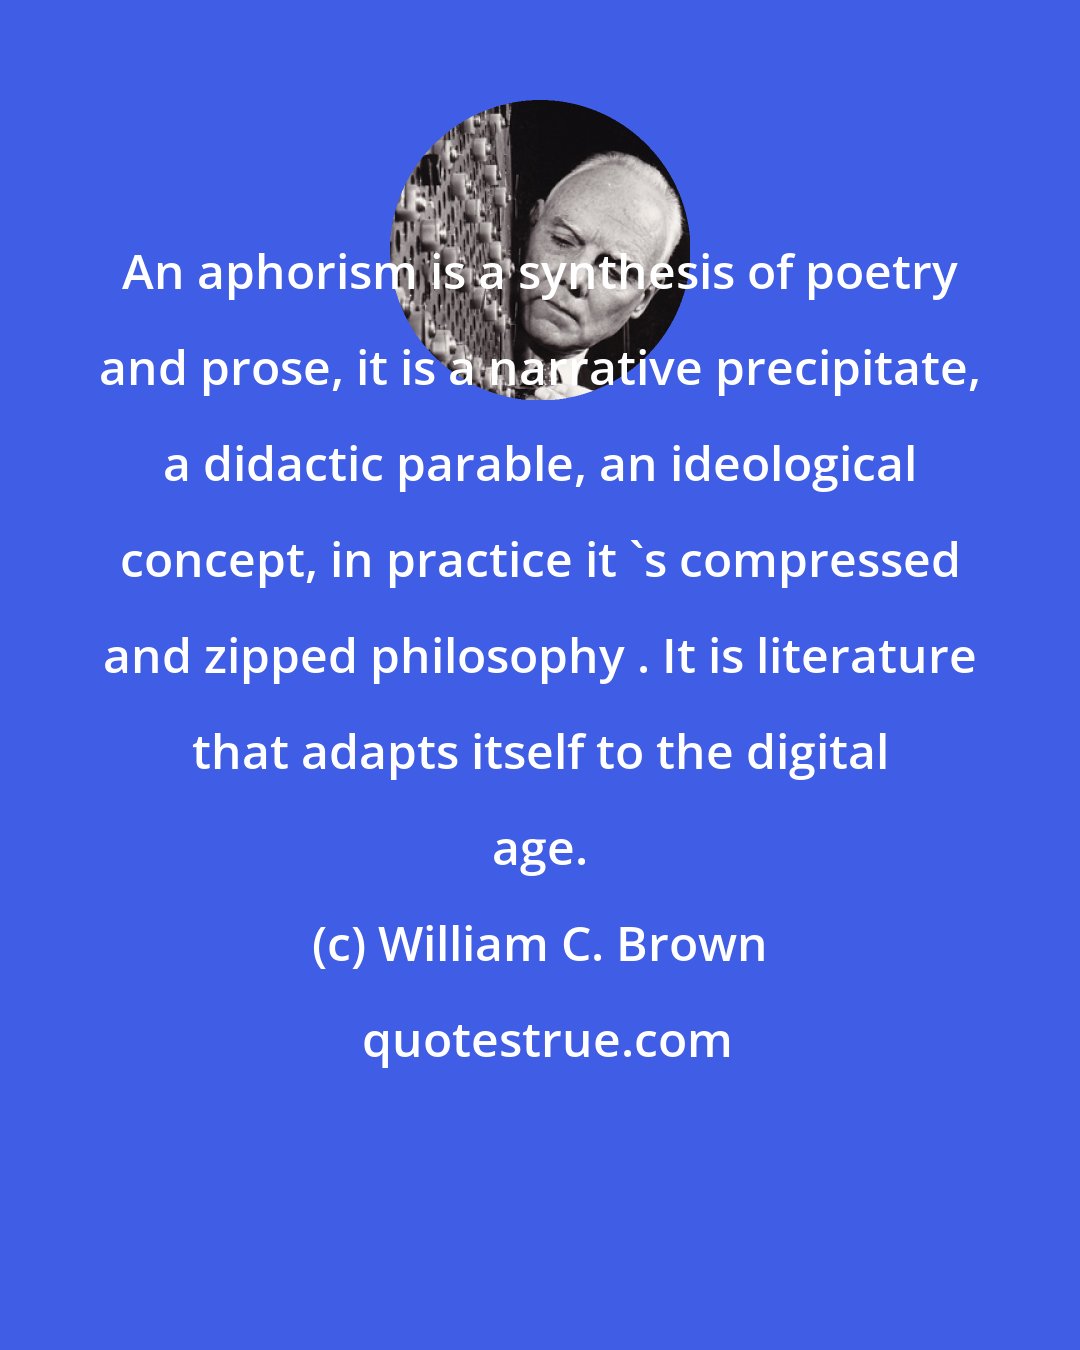 William C. Brown: An aphorism is a synthesis of poetry and prose, it is a narrative precipitate, a didactic parable, an ideological concept, in practice it 's compressed and zipped philosophy . It is literature that adapts itself to the digital age.